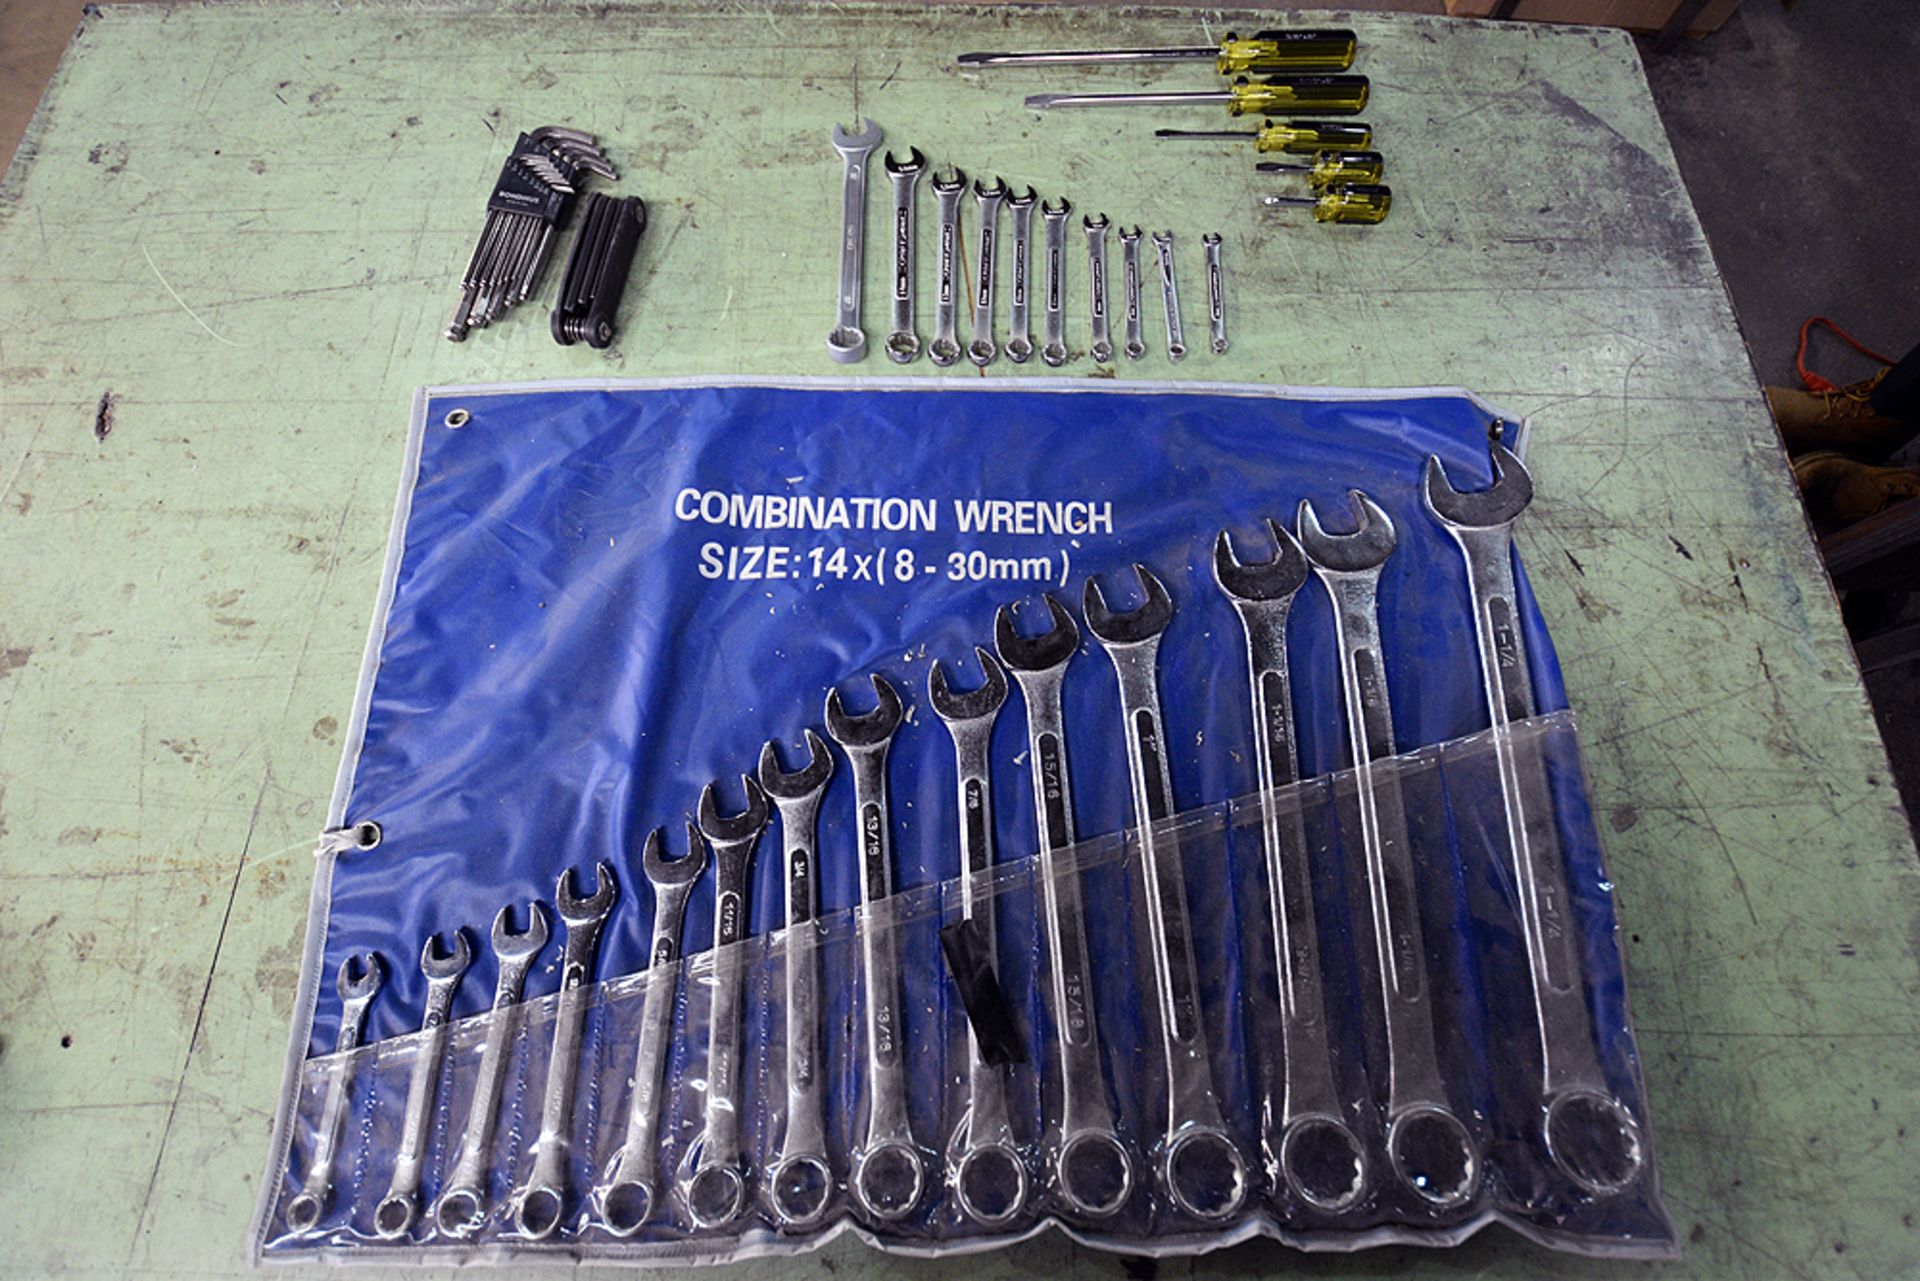 (1)14 pc Combination Wrench Set (8mm-30mm) w/ Ass't Wrenches, Screwdrivers, and Allen Keys